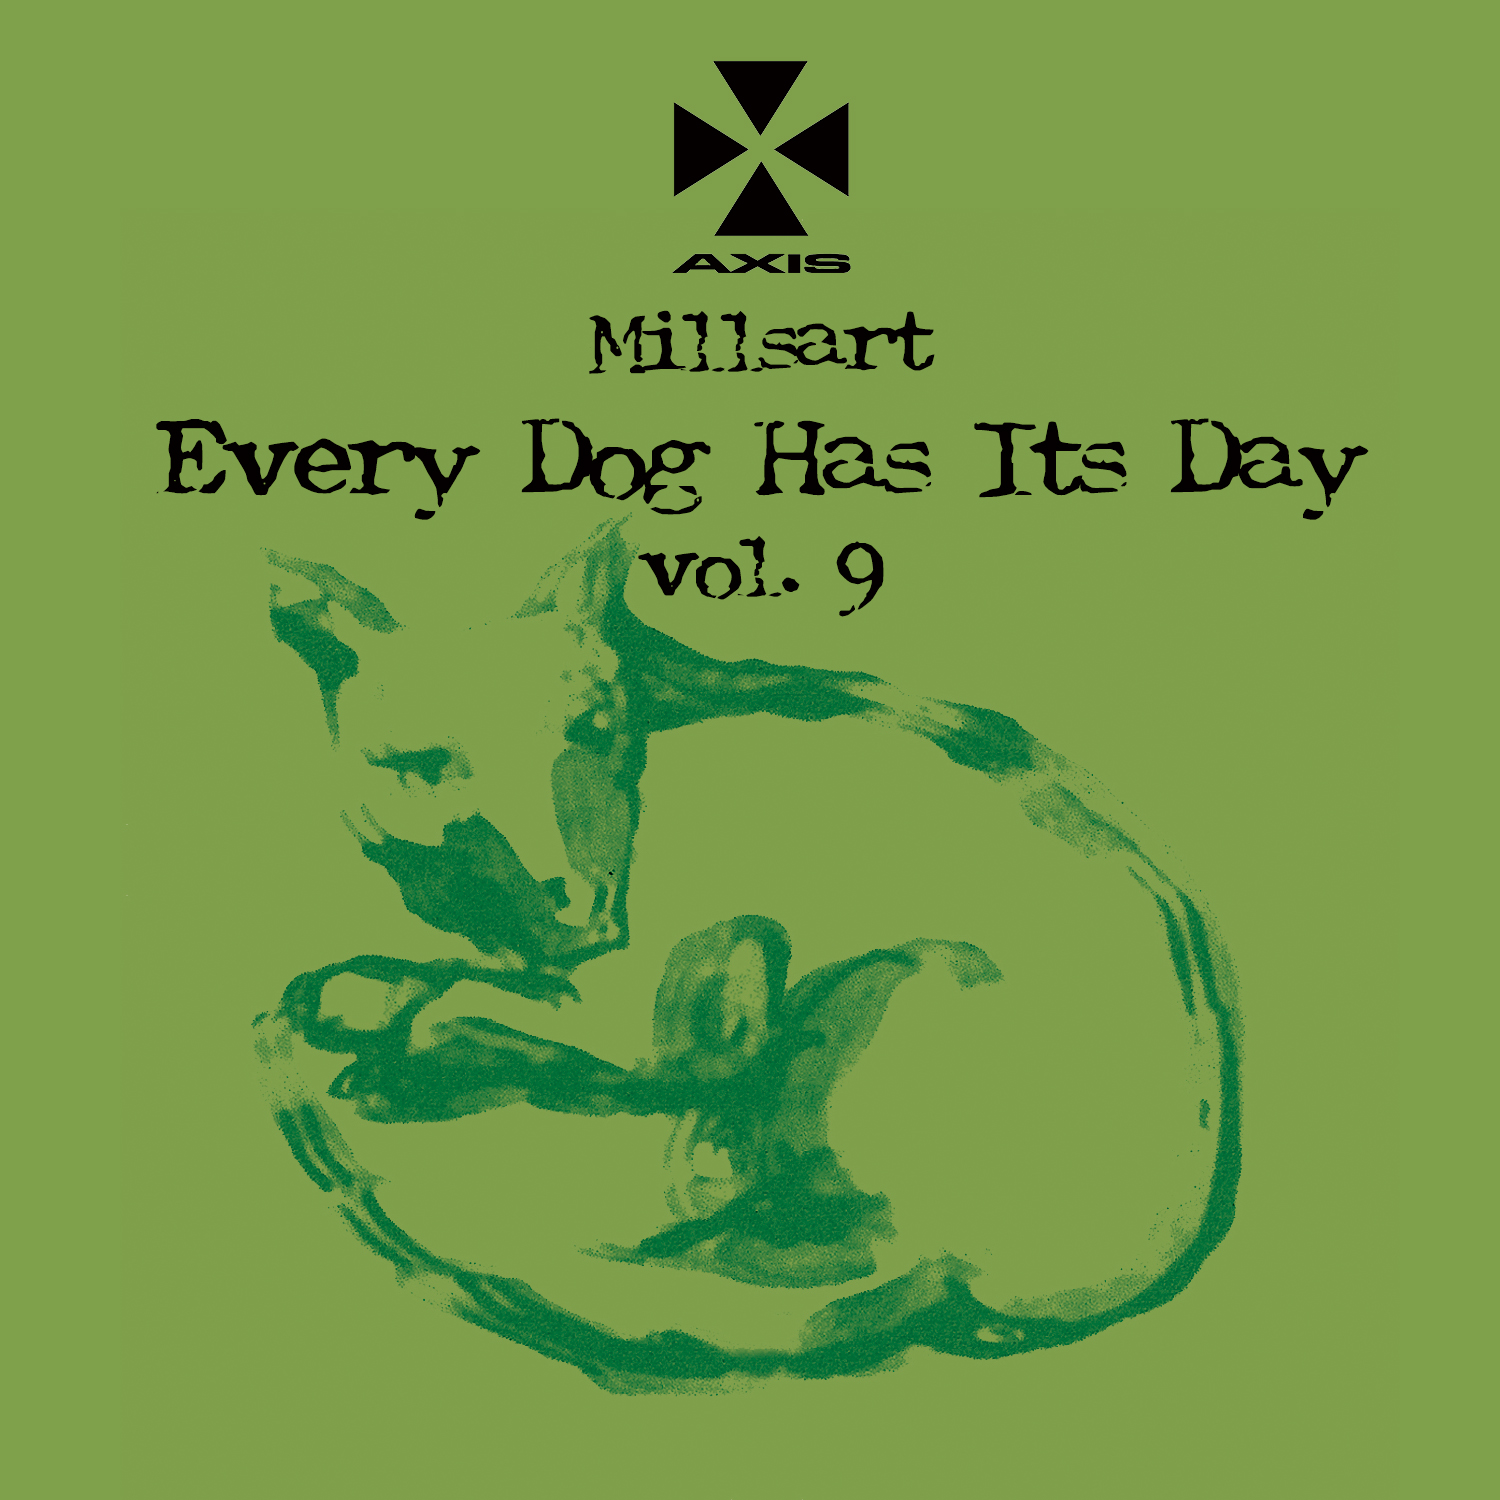 Millsart – Every Dog Has Its Day vol. 9